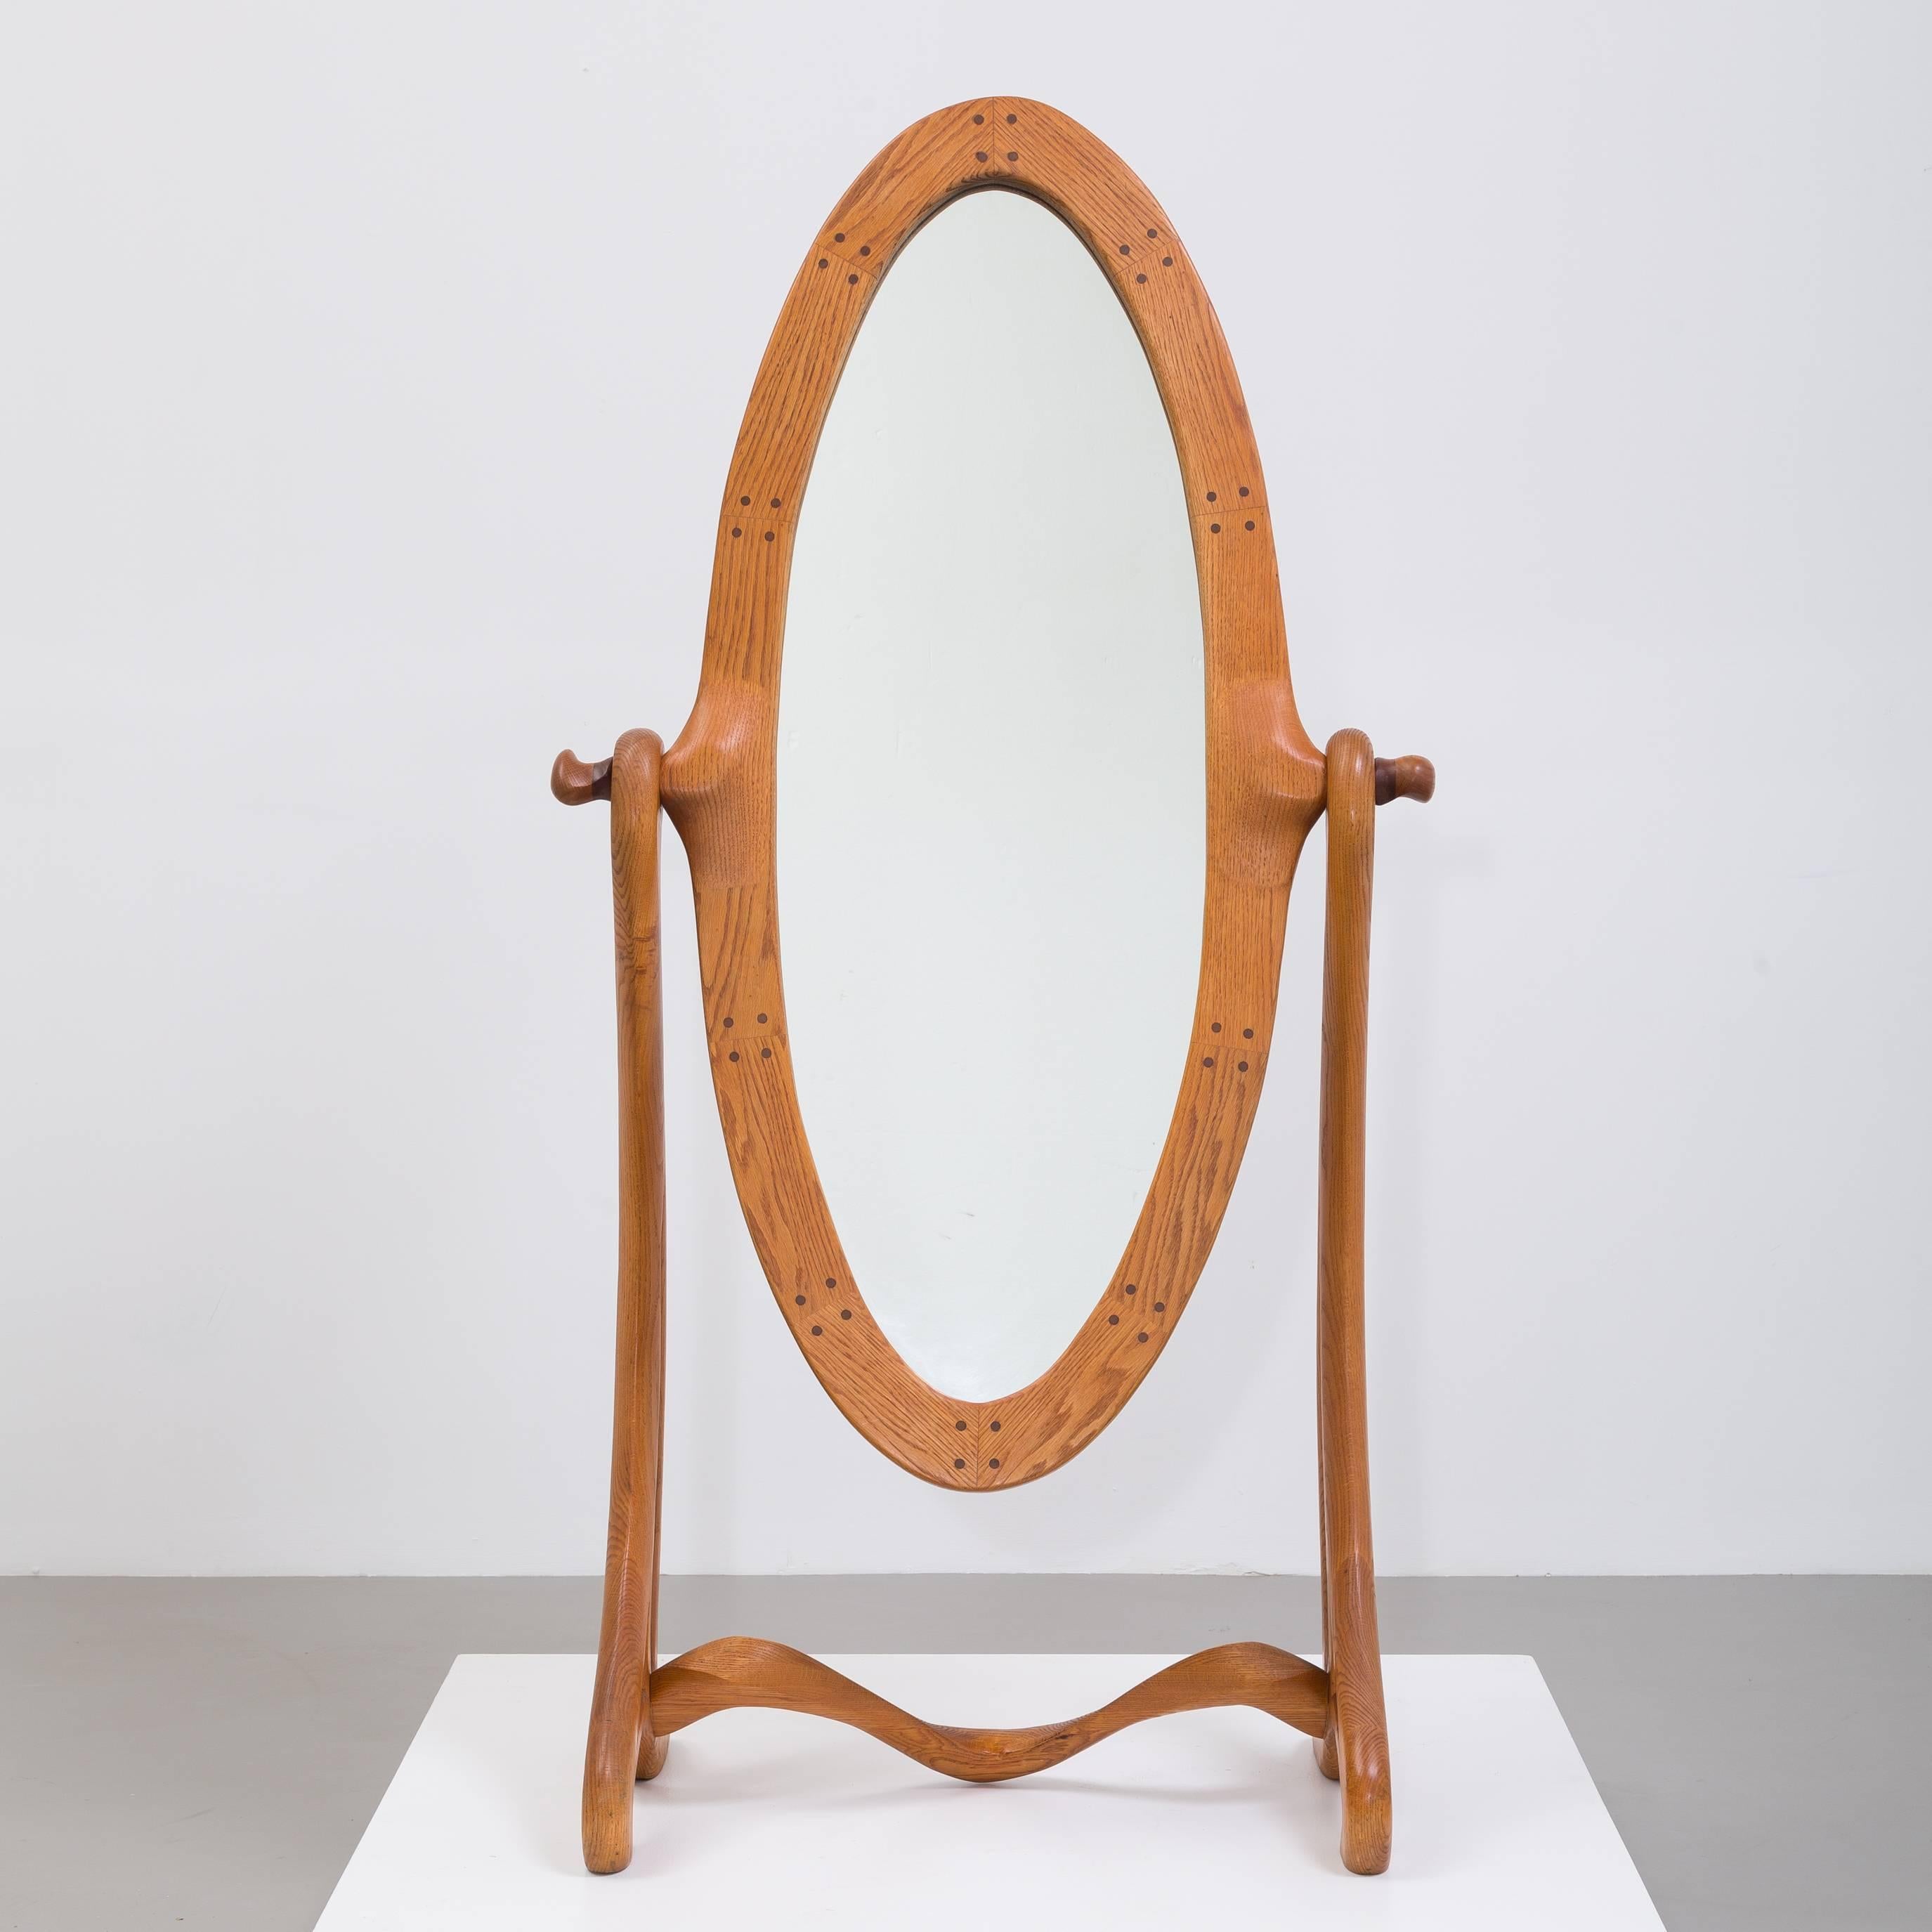 A sculptural maple wood framed cheval mirror, USA, 1950s
